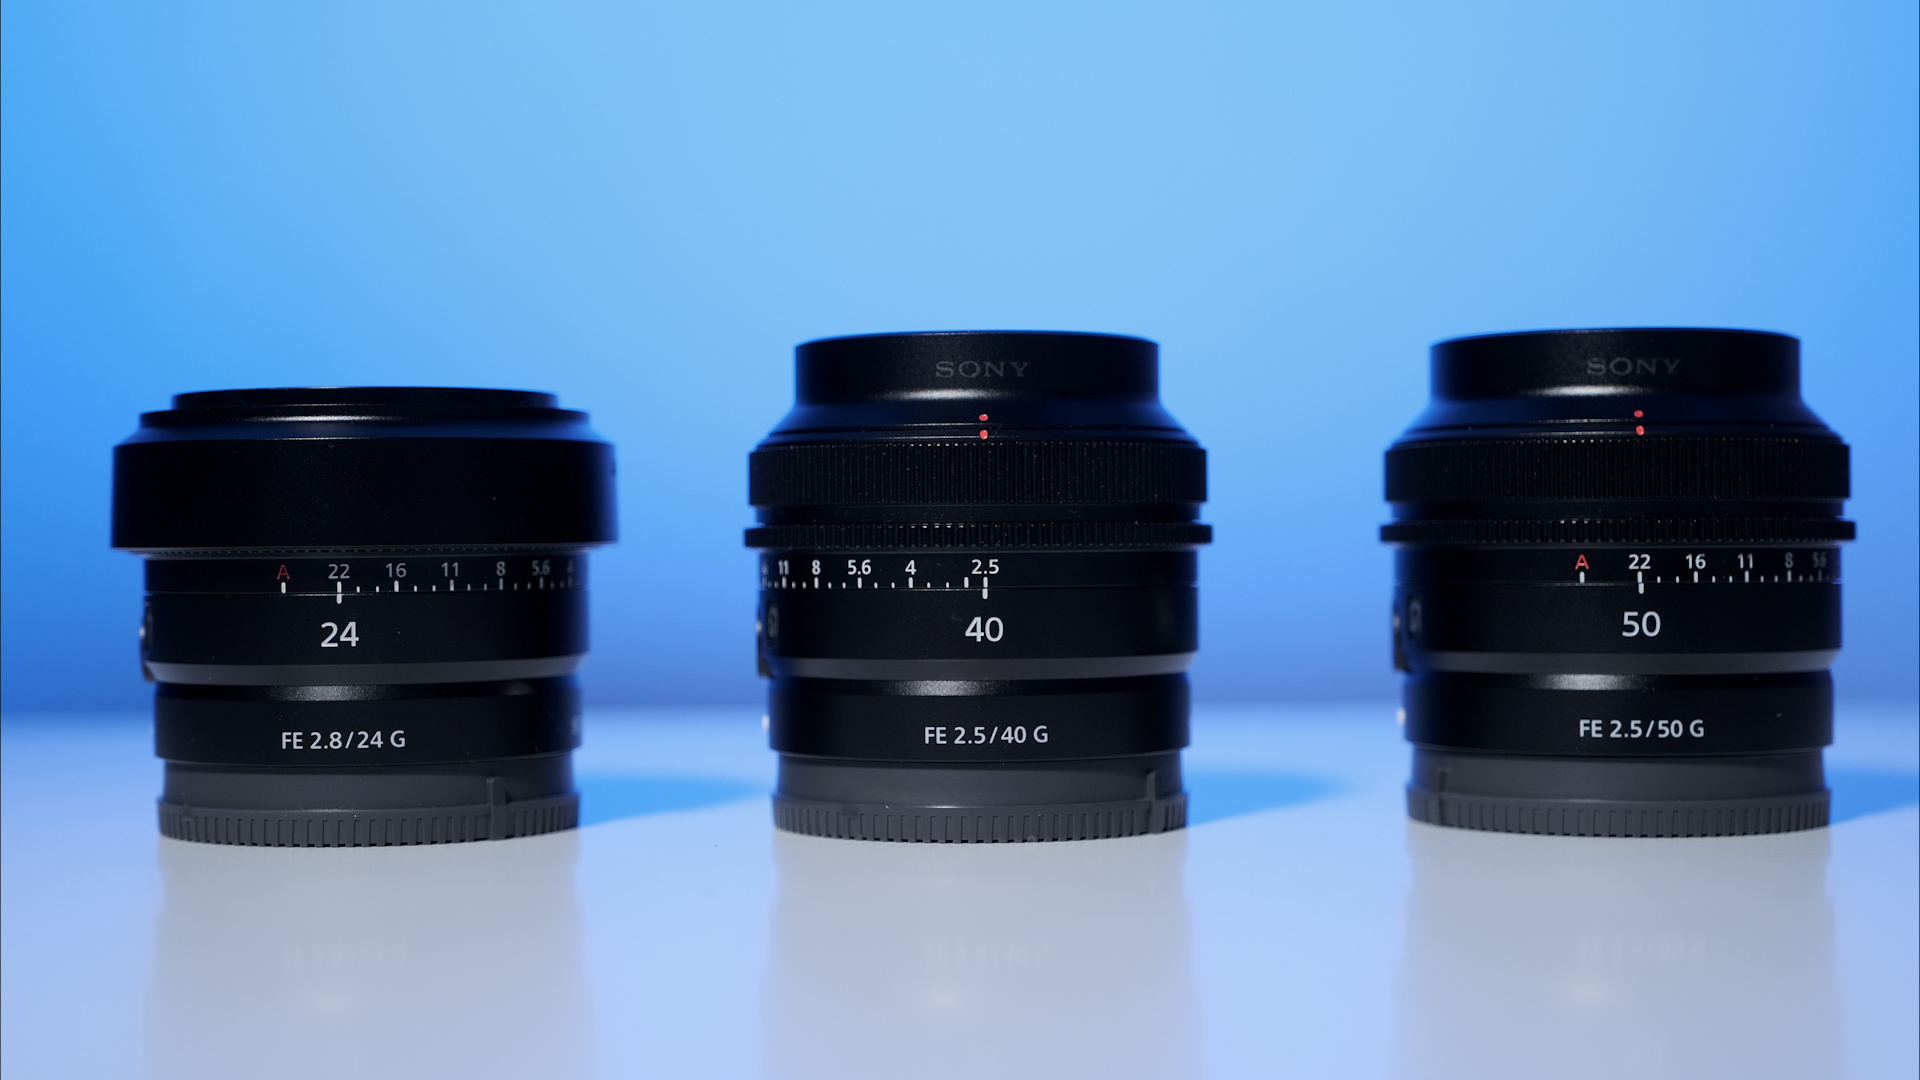 ソニーが24mm F2.8 G、40mm F2.5 G、50mm F2.5 Gレンズを発表 | CineD